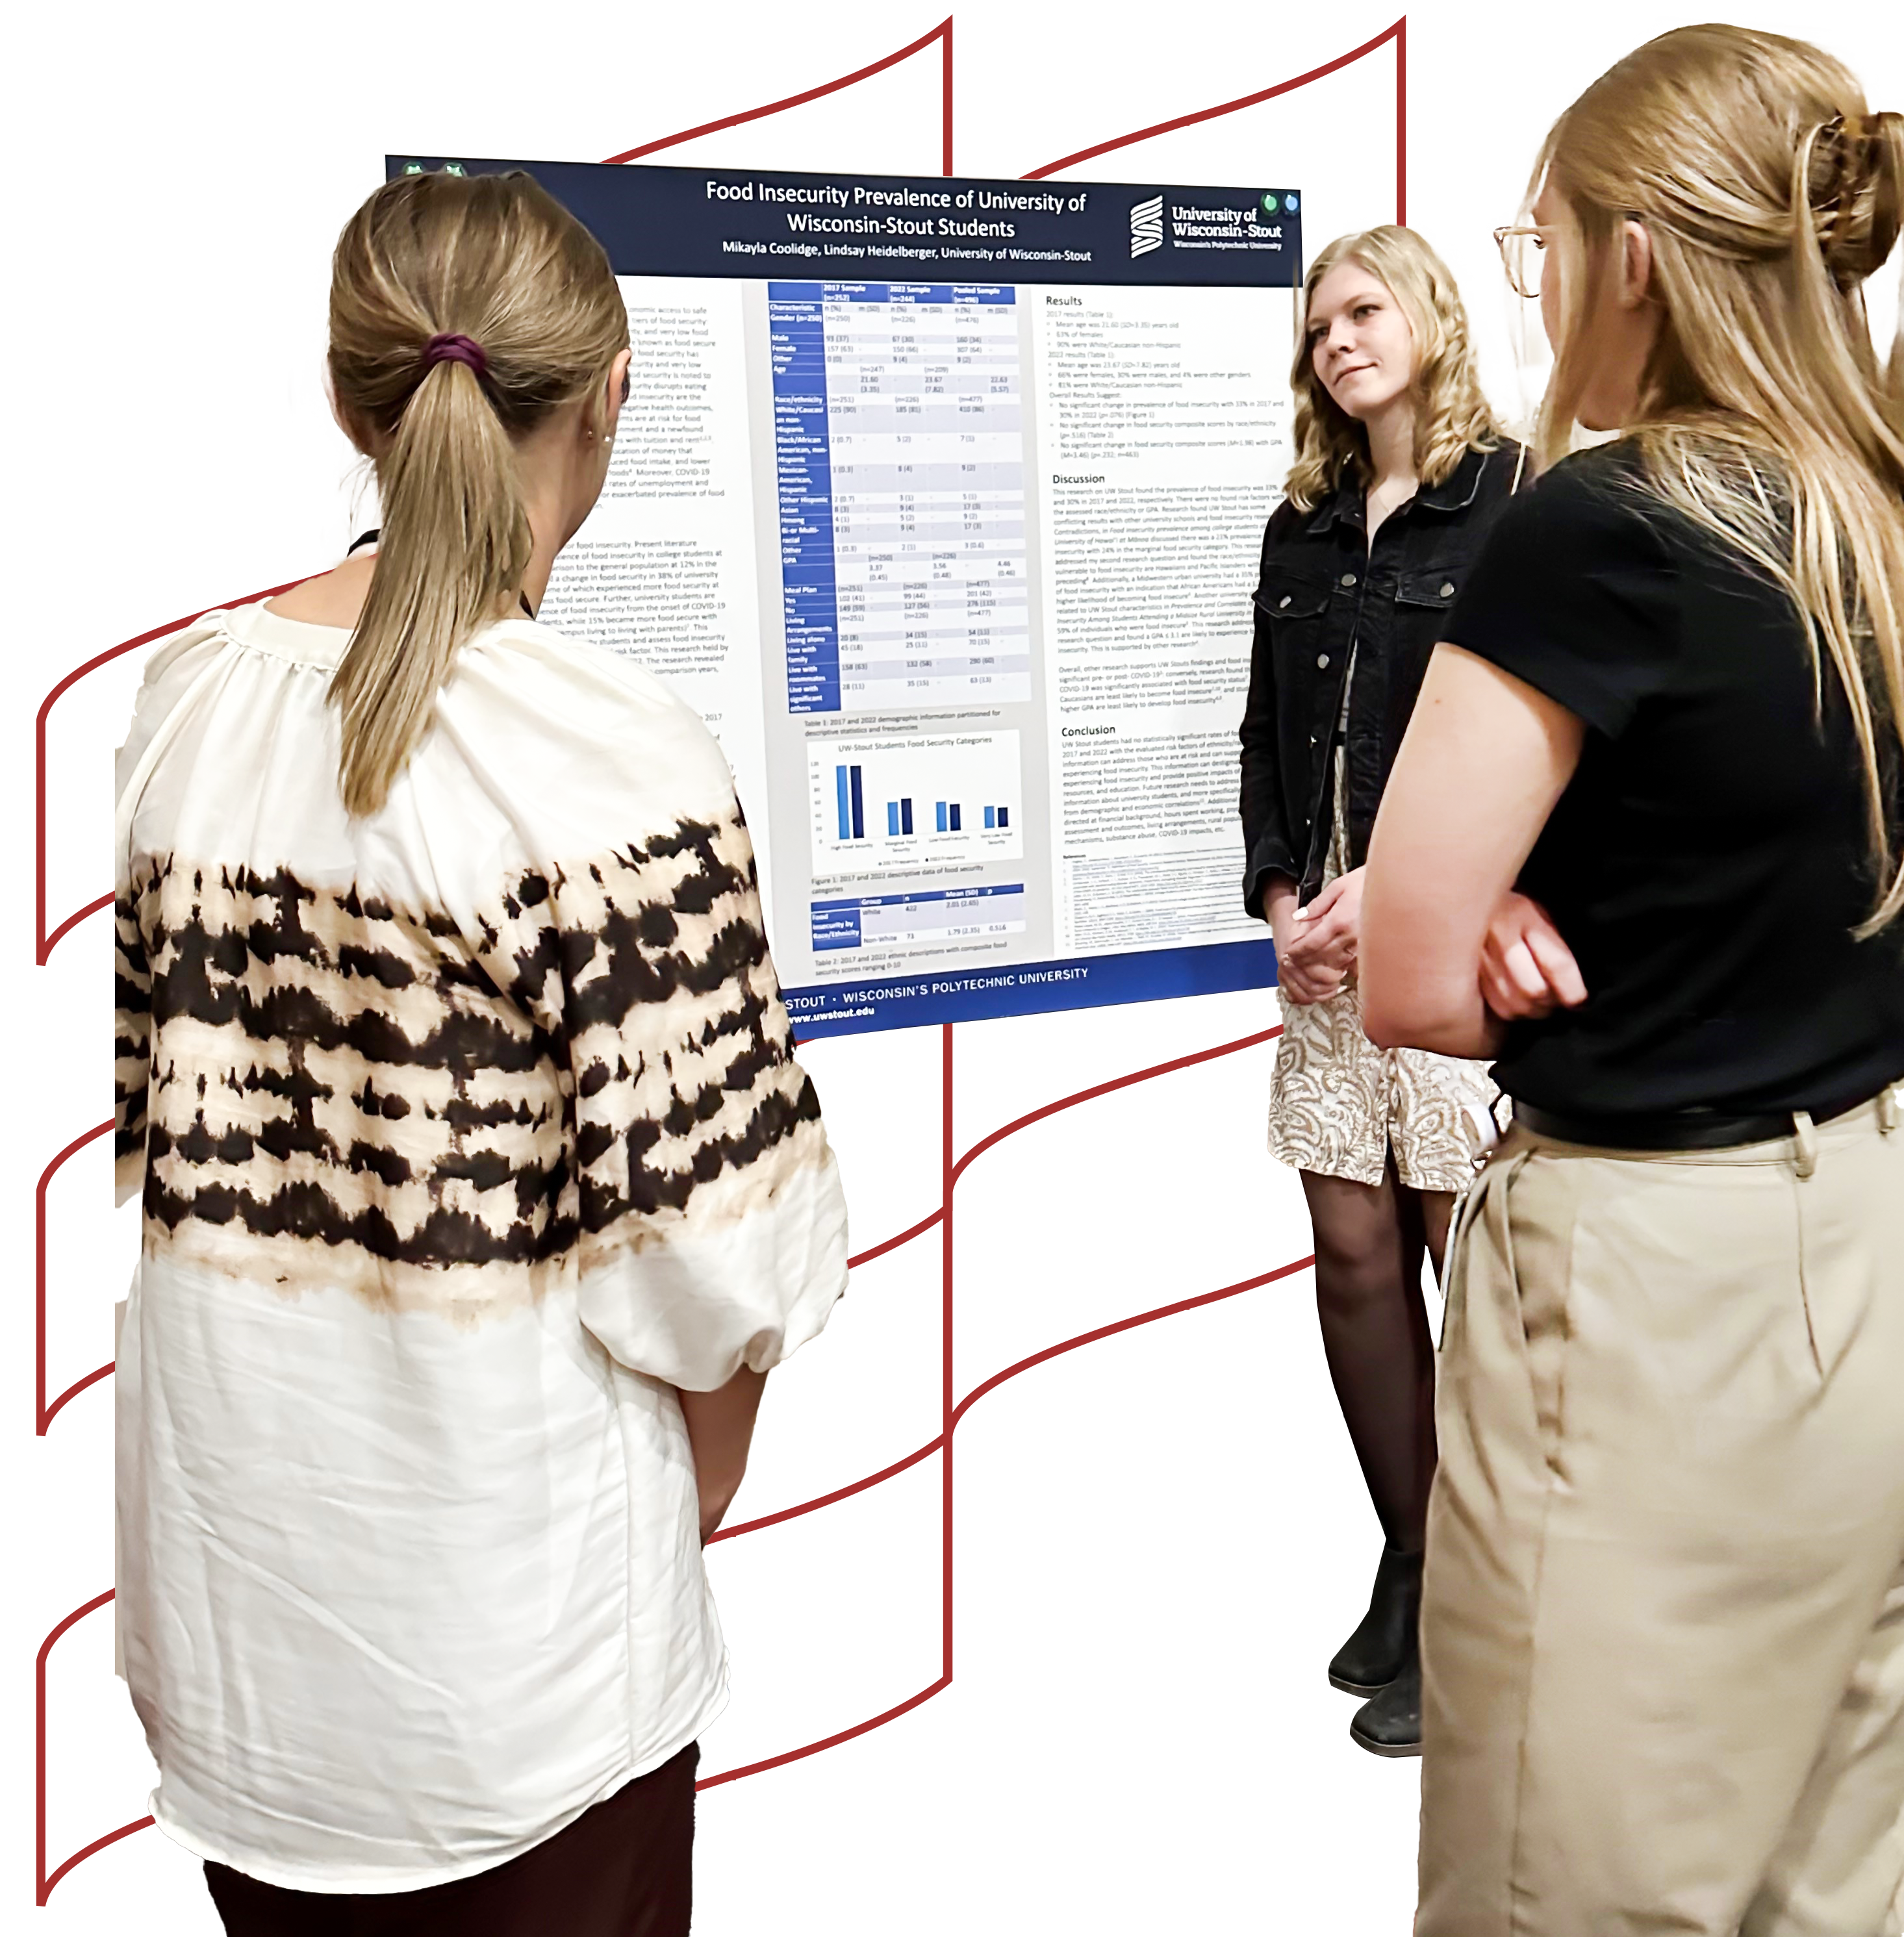 Dietetic Internship students review research.